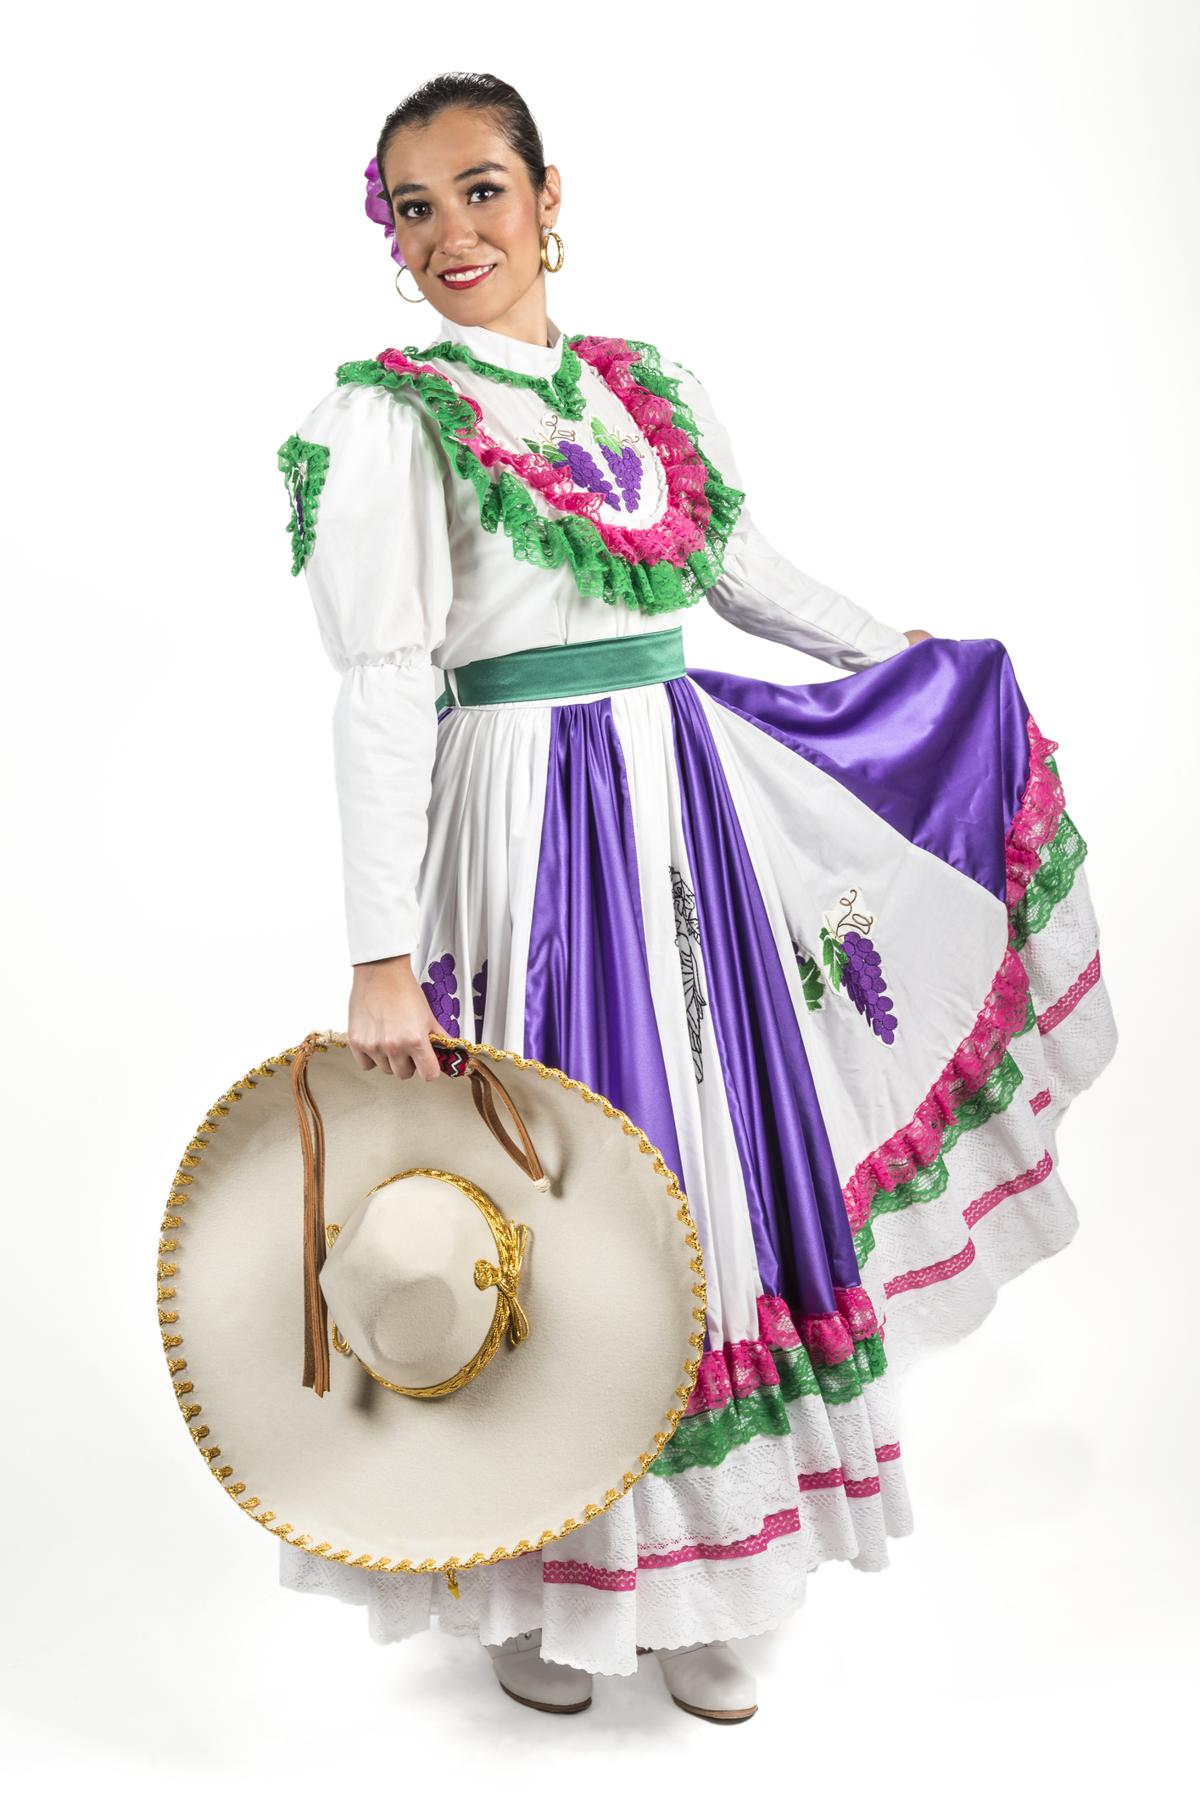 Traditional Mexican dress history